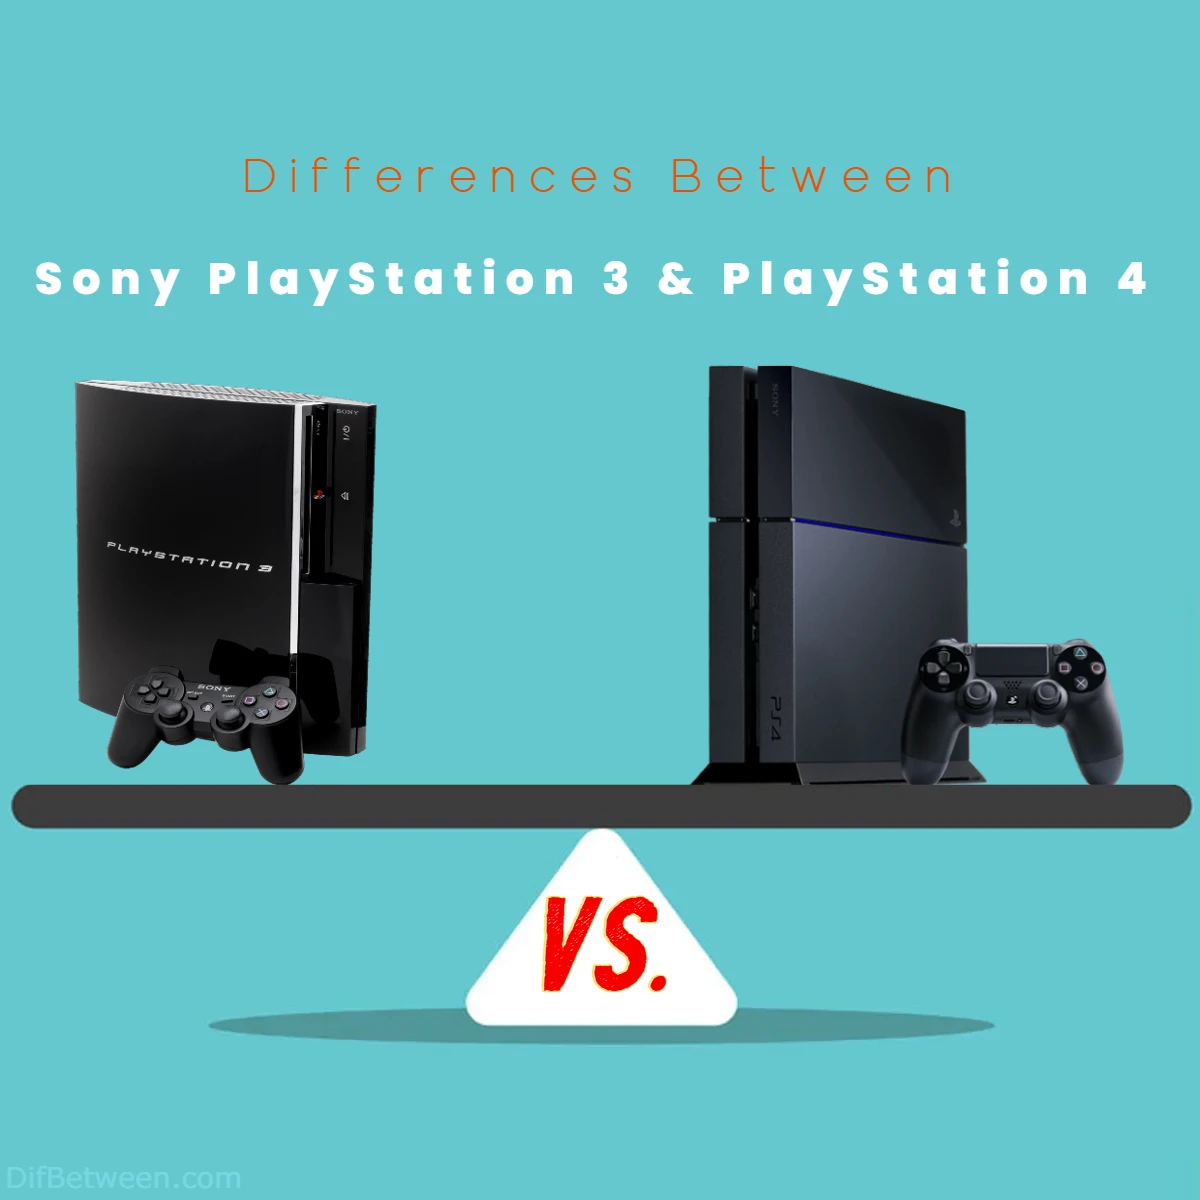 Differences Between Sony PlayStation 3 vs PlayStation 4